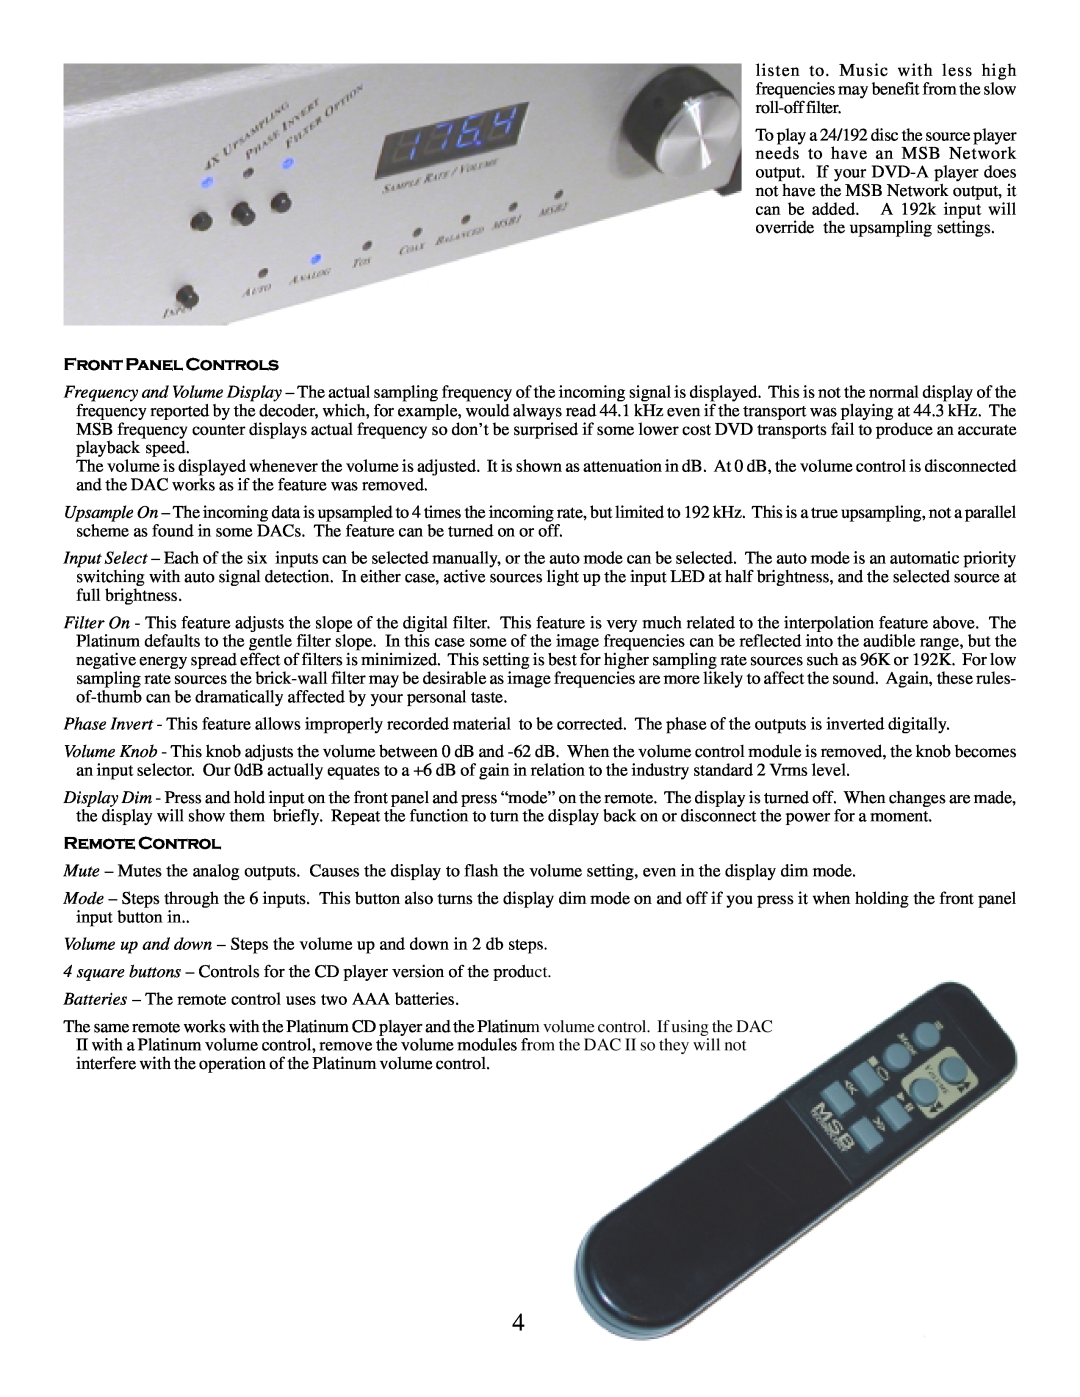 MSB Technology DAC II user manual Front Panel Controls, Remote Control 